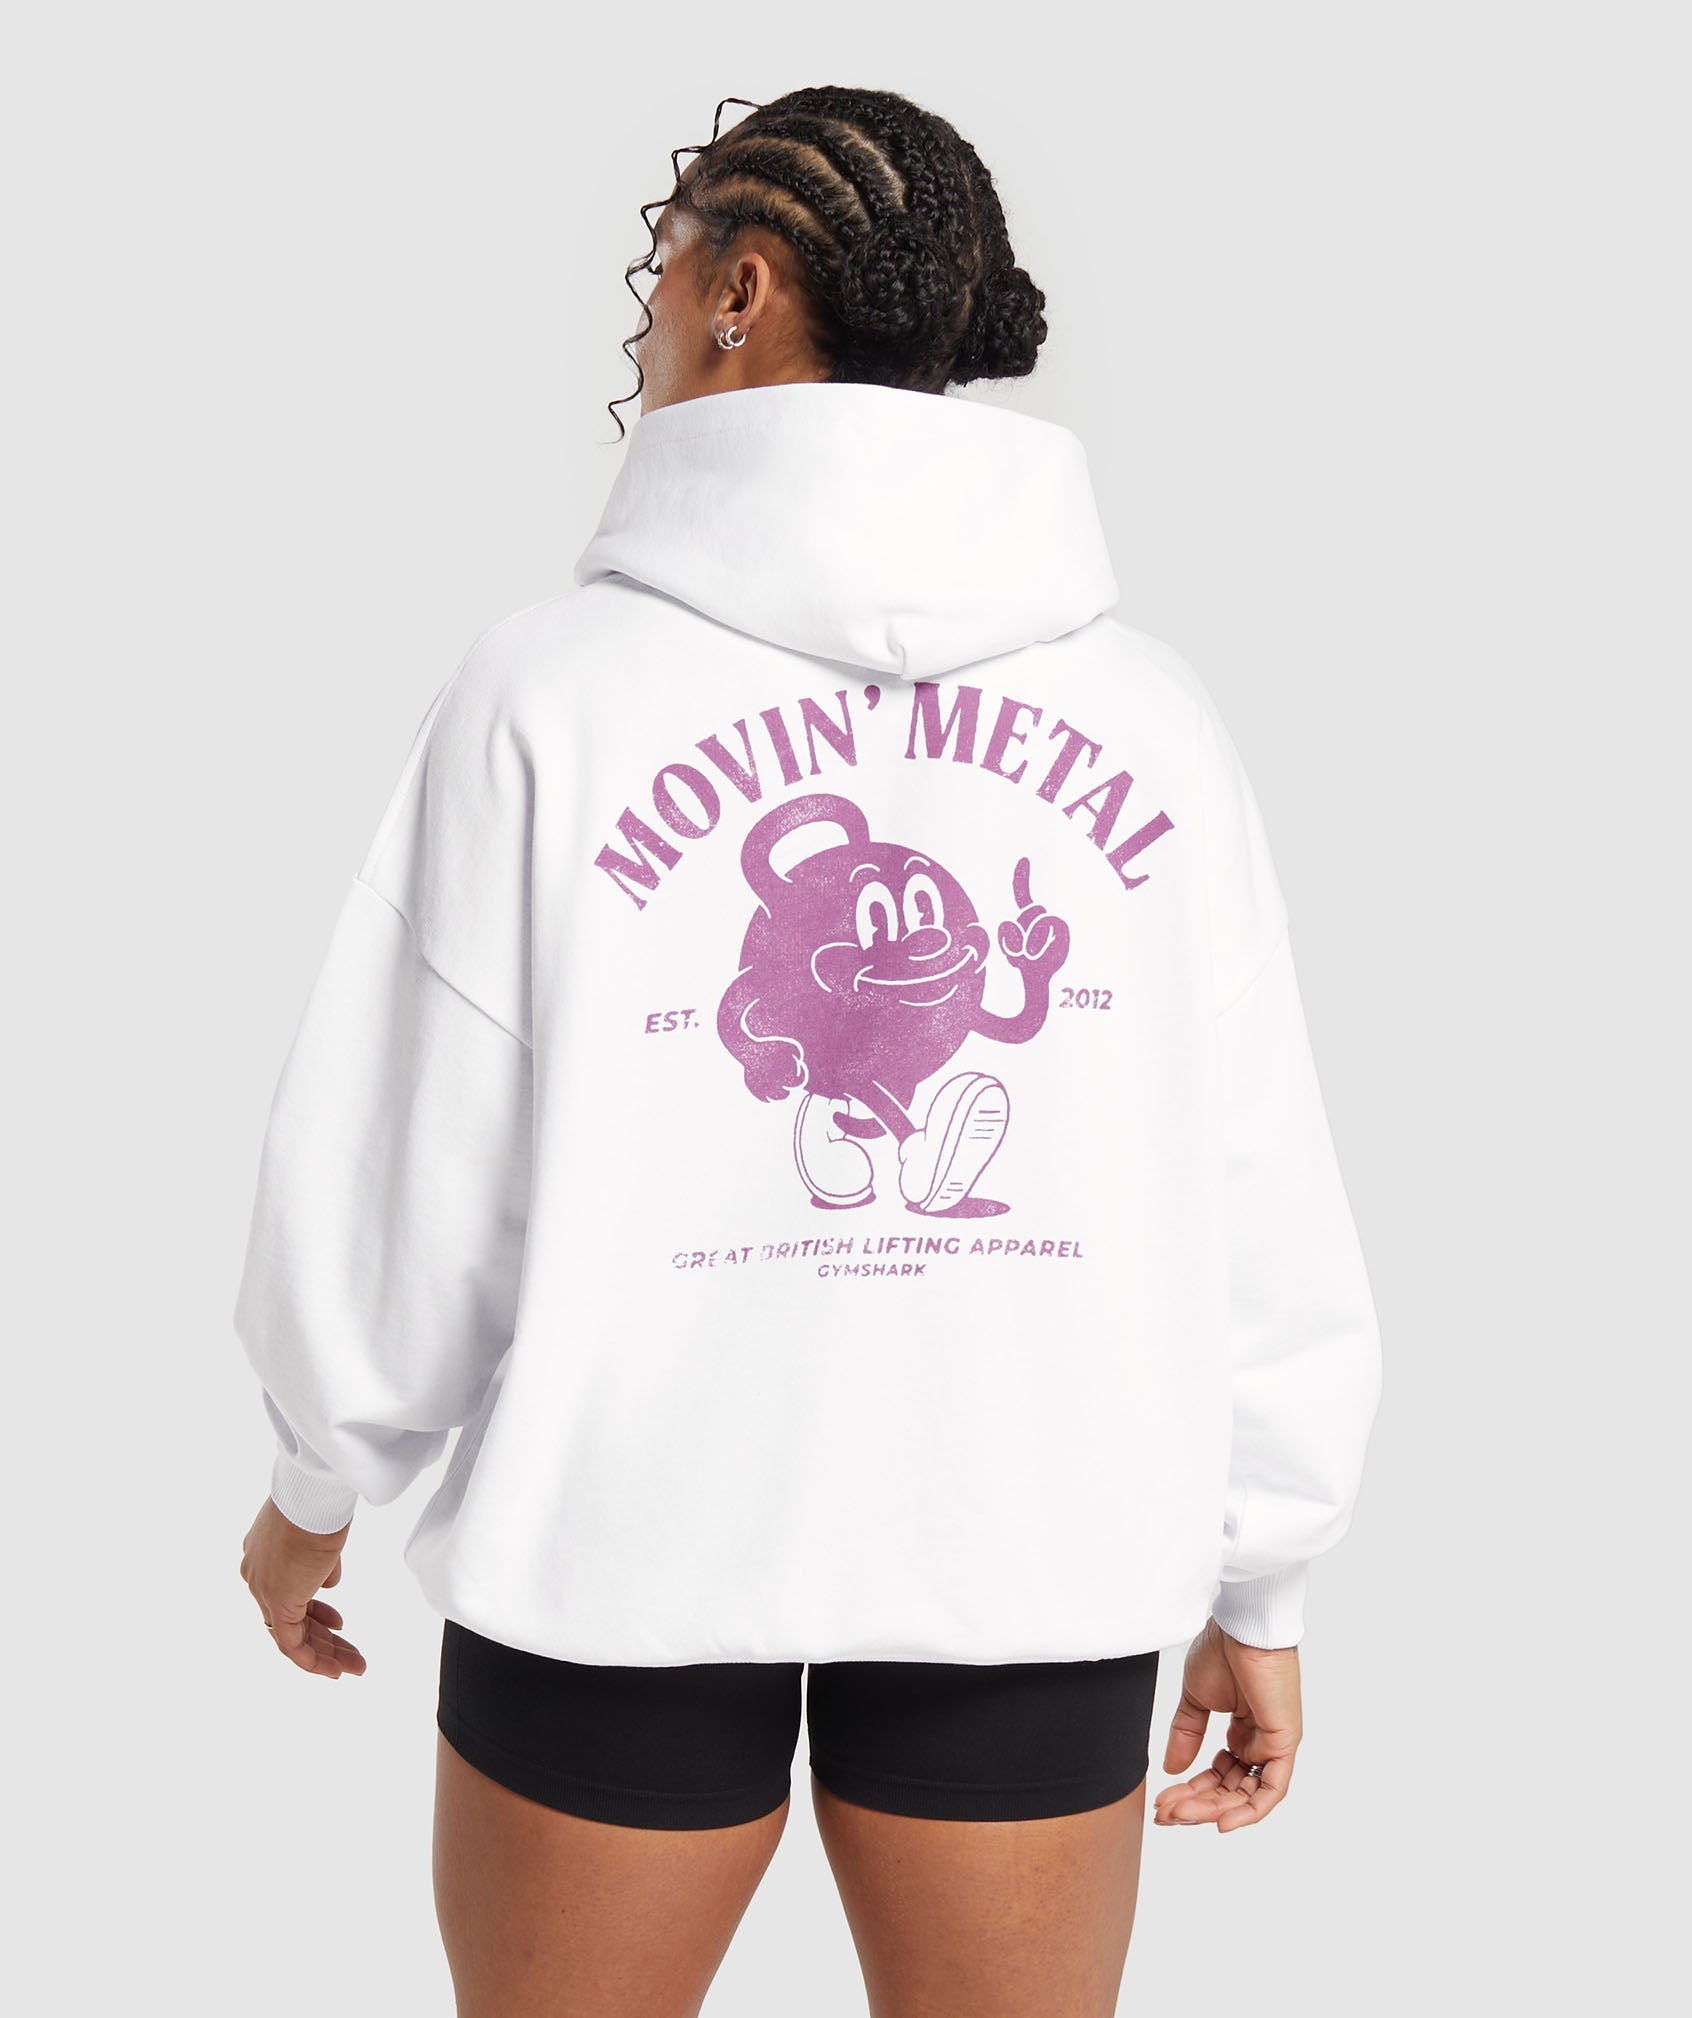 Movin' Metal GFX Hoodie in White - view 1